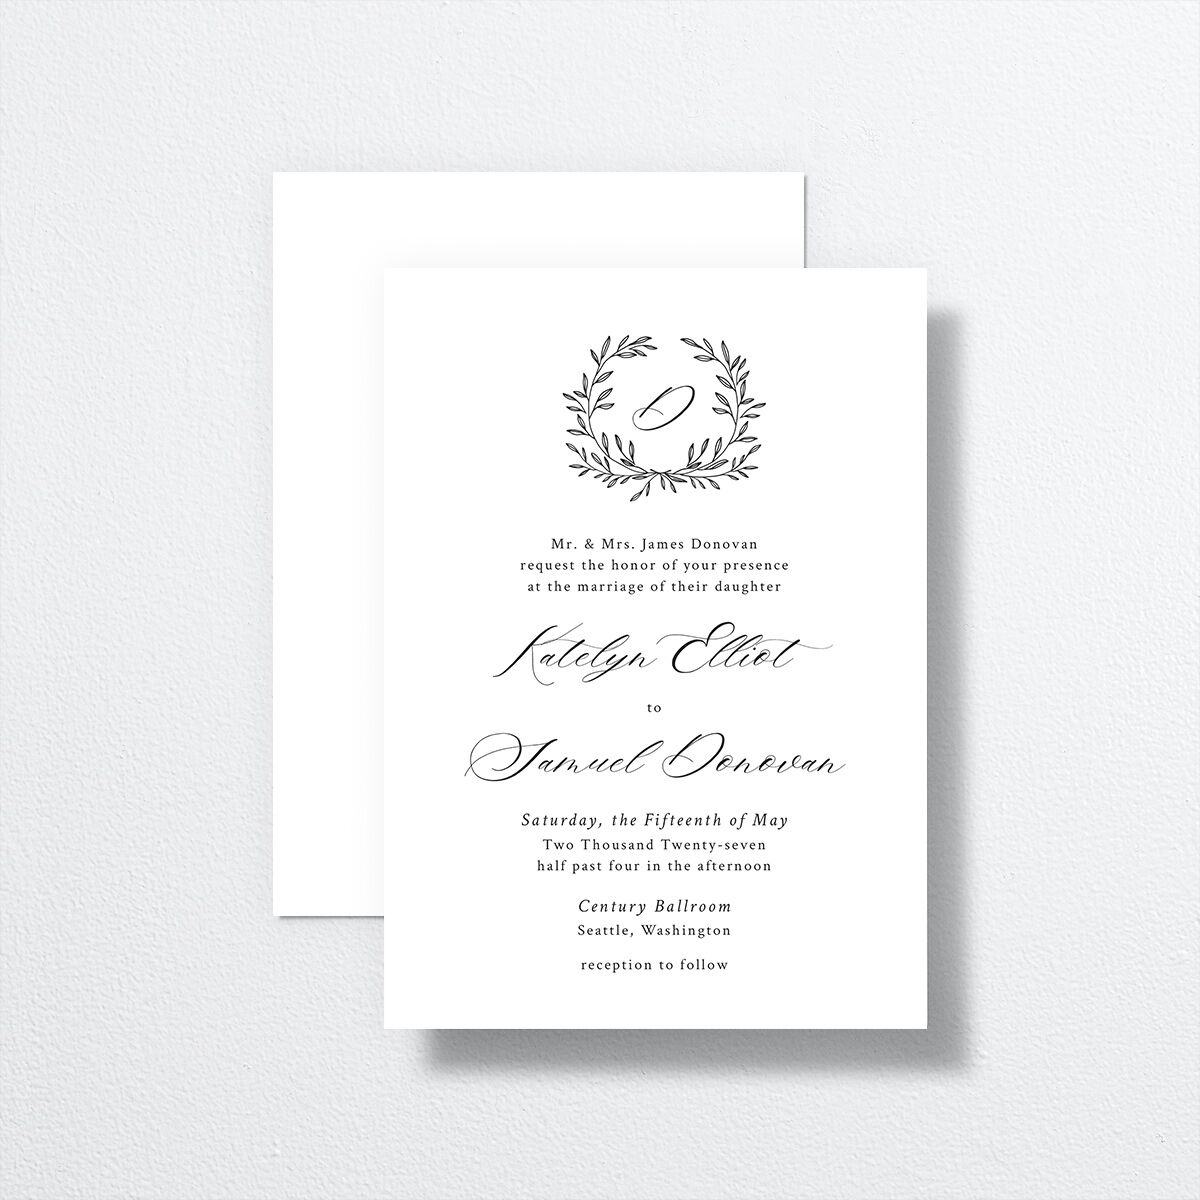 Monogram Wreath Wedding Invitations front-and-back in black